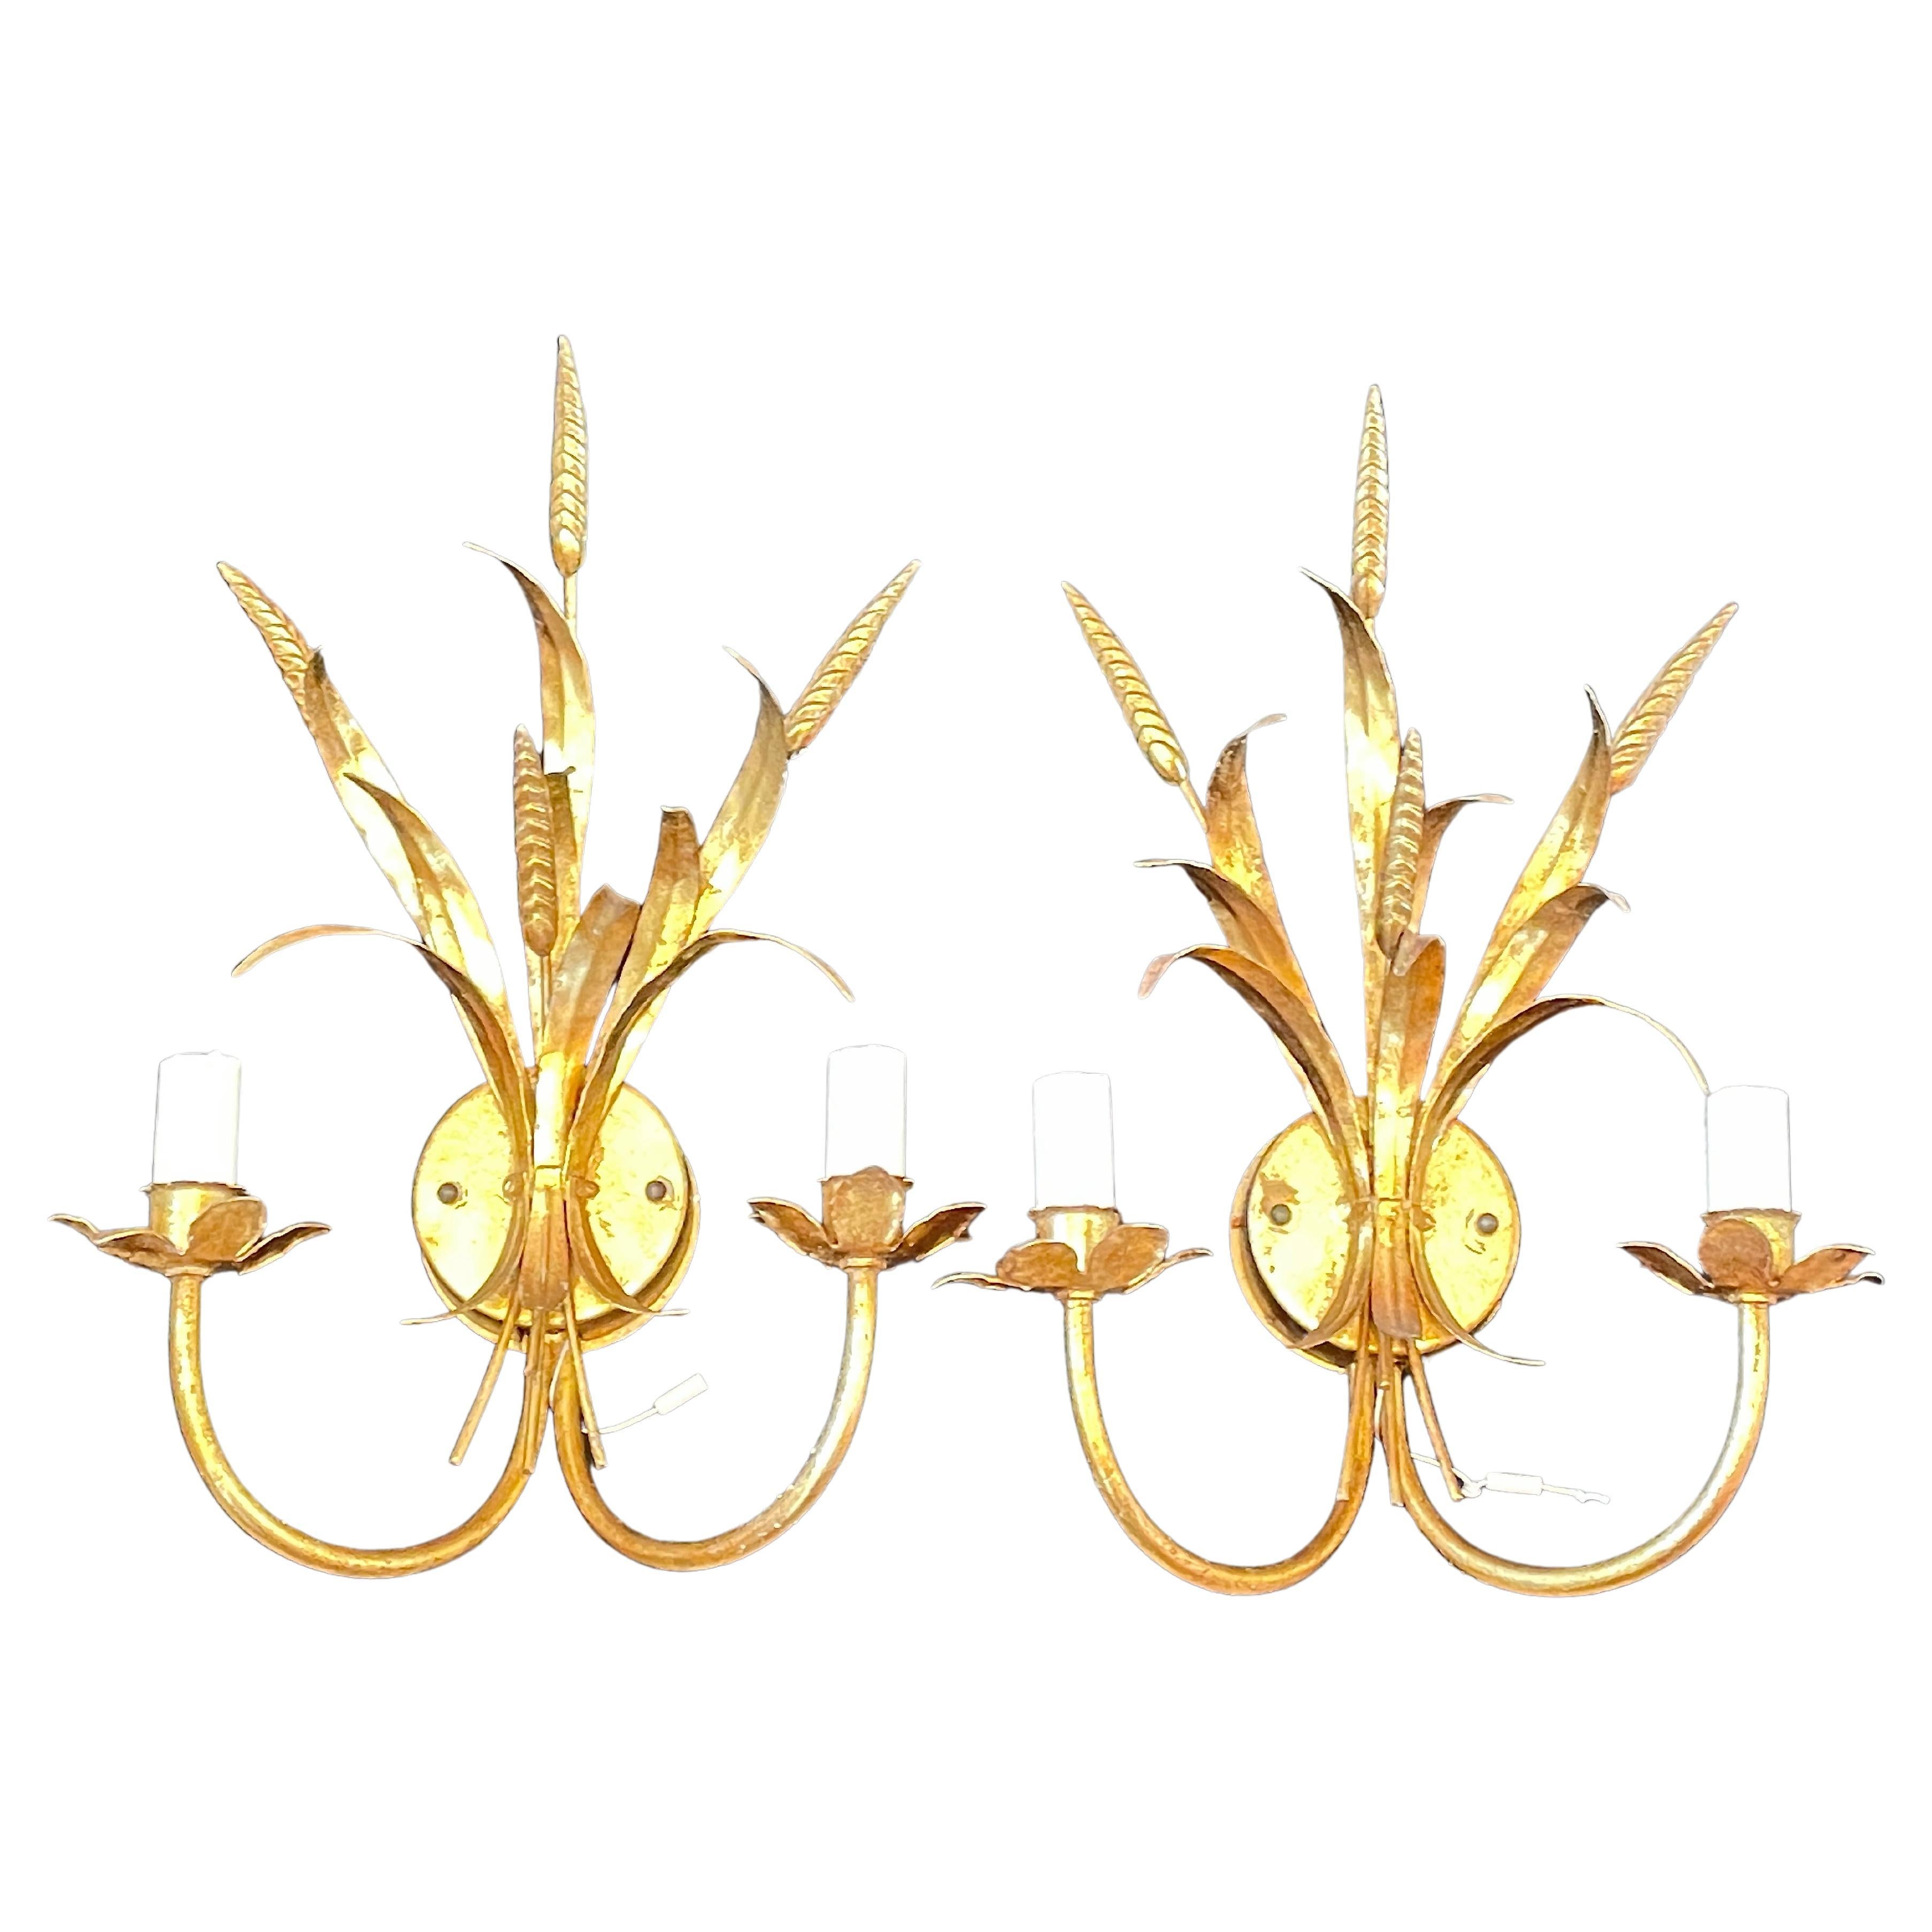 A pair Hollywood Regency mid-century gilt tole wheat sheaf sconces, each fixture requires two European E14 candelabra bulbs, each bulb up to 40 watts. The wall lights have a beautiful patina and gives each room a eclectic statement.